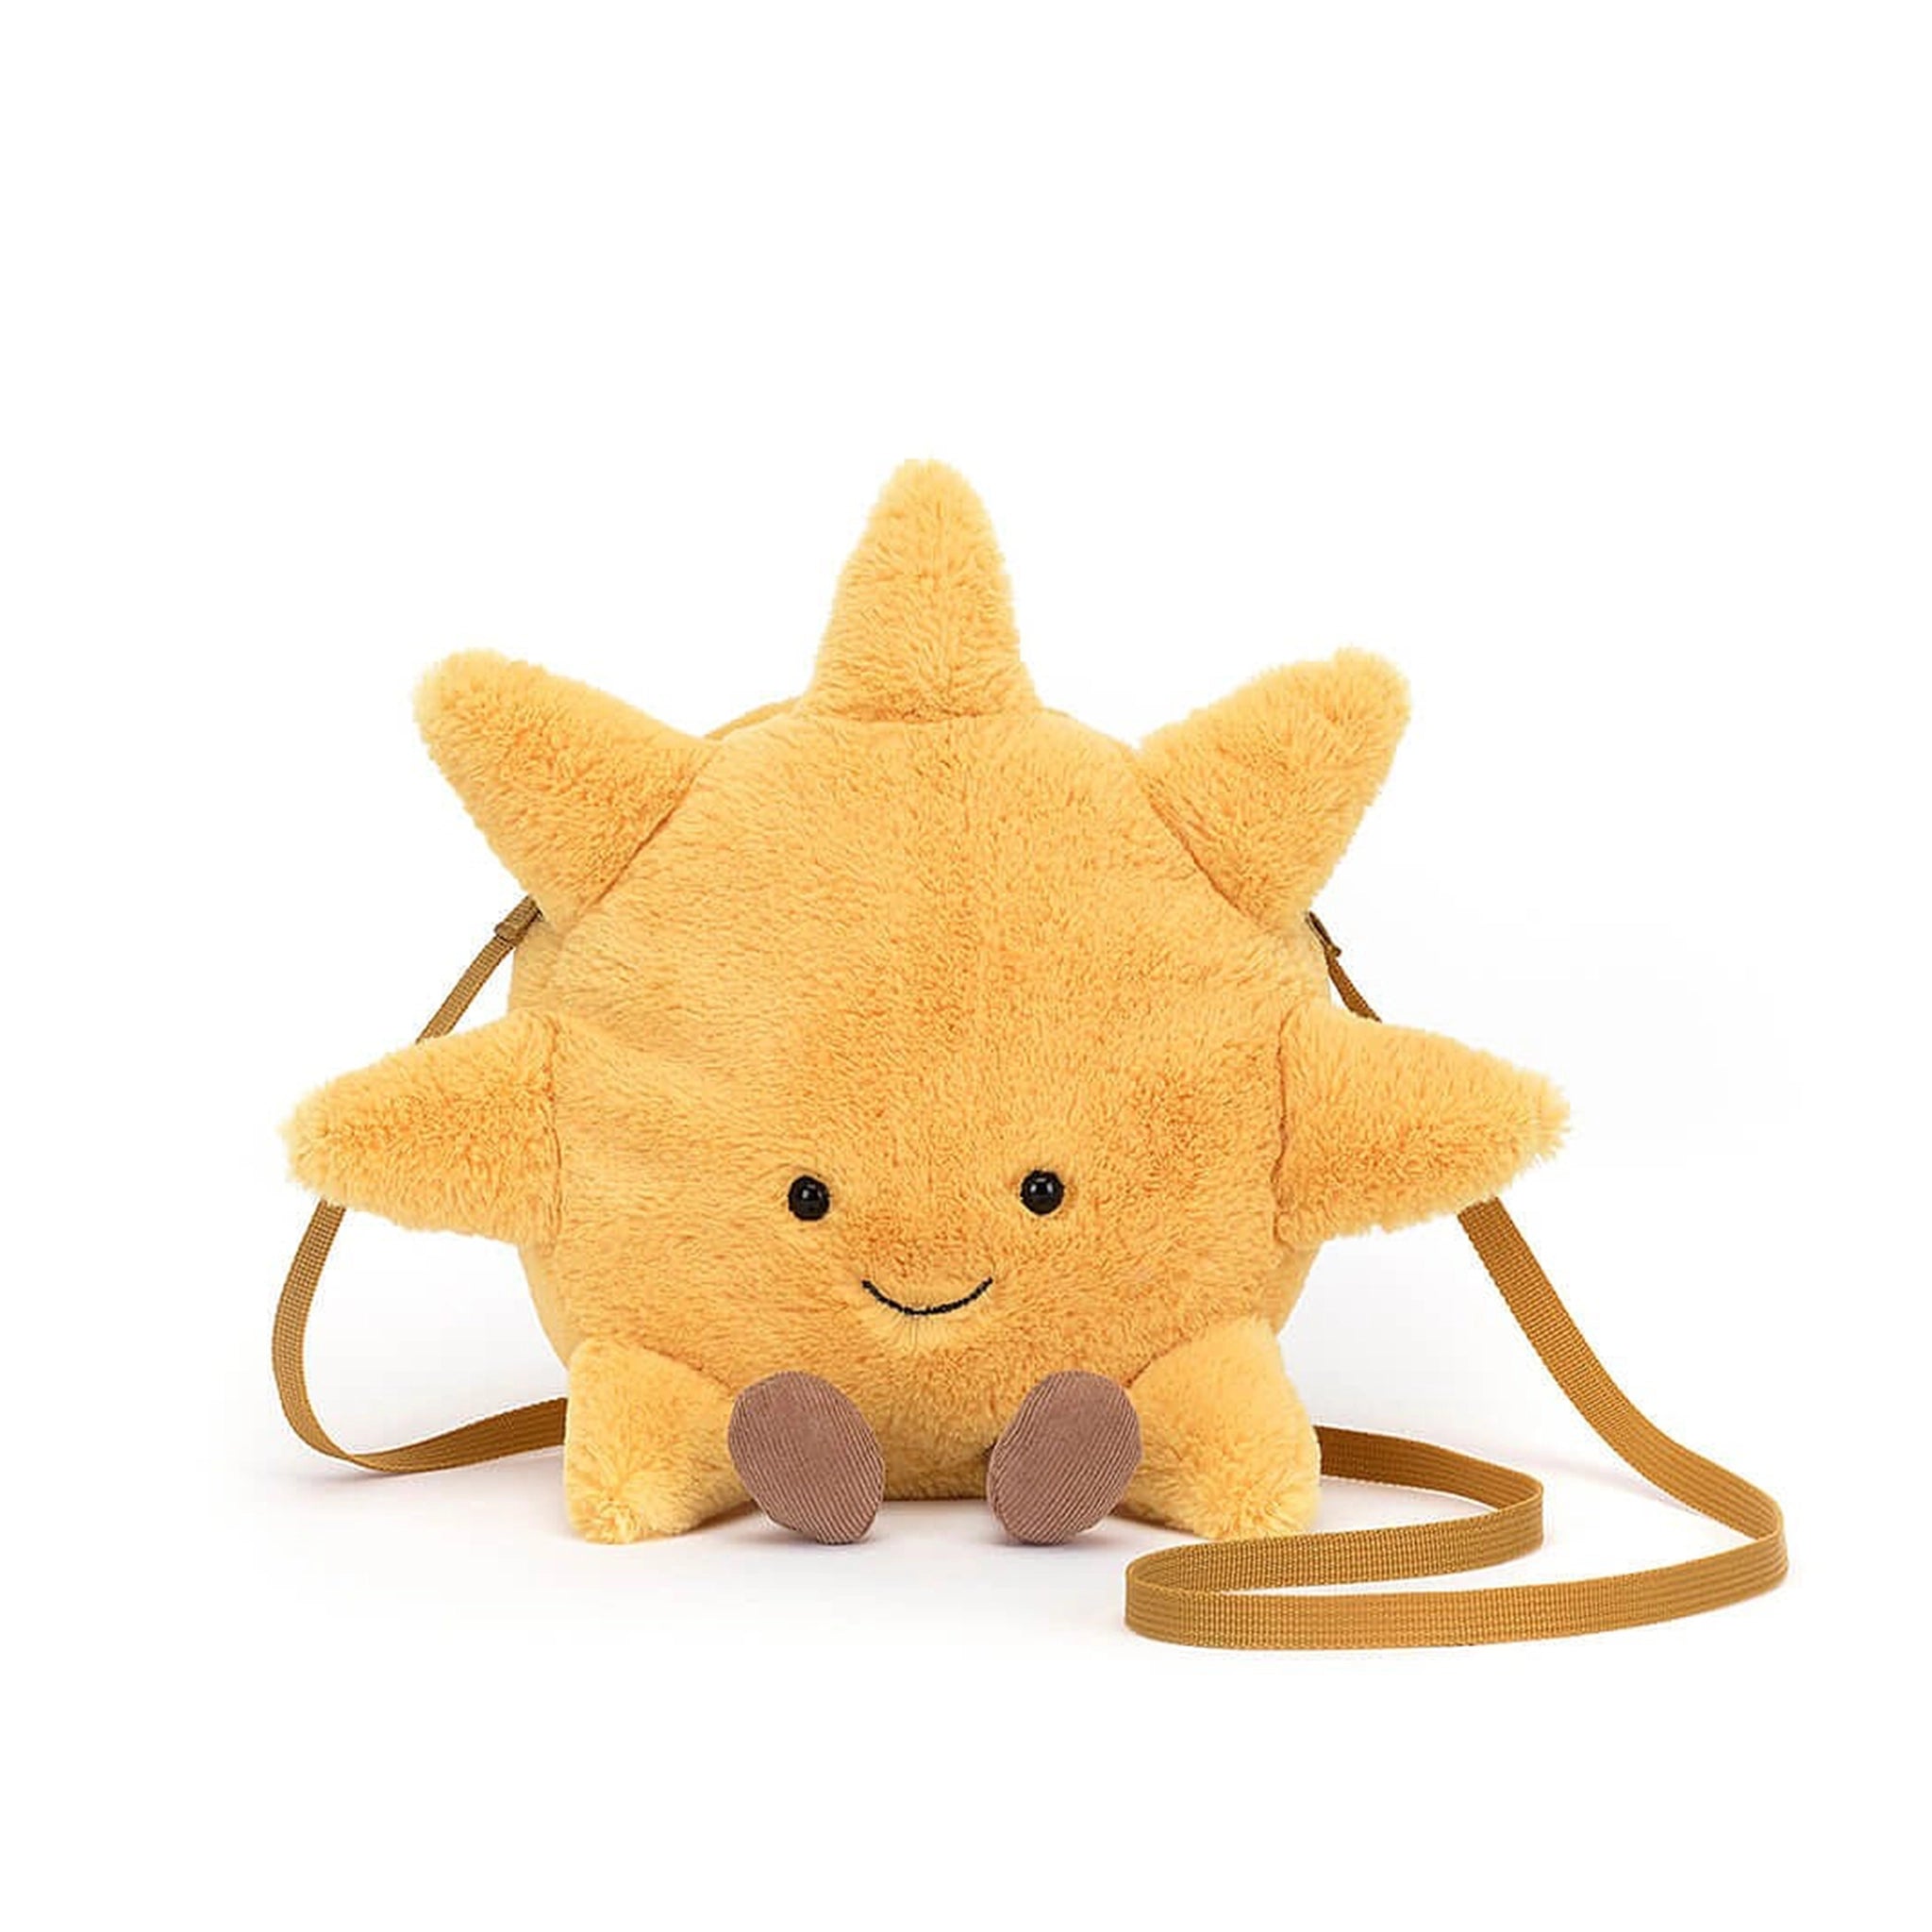 On a white background is fuzzy yellow sun bag with a brown strap and a zipper opening at the top. 